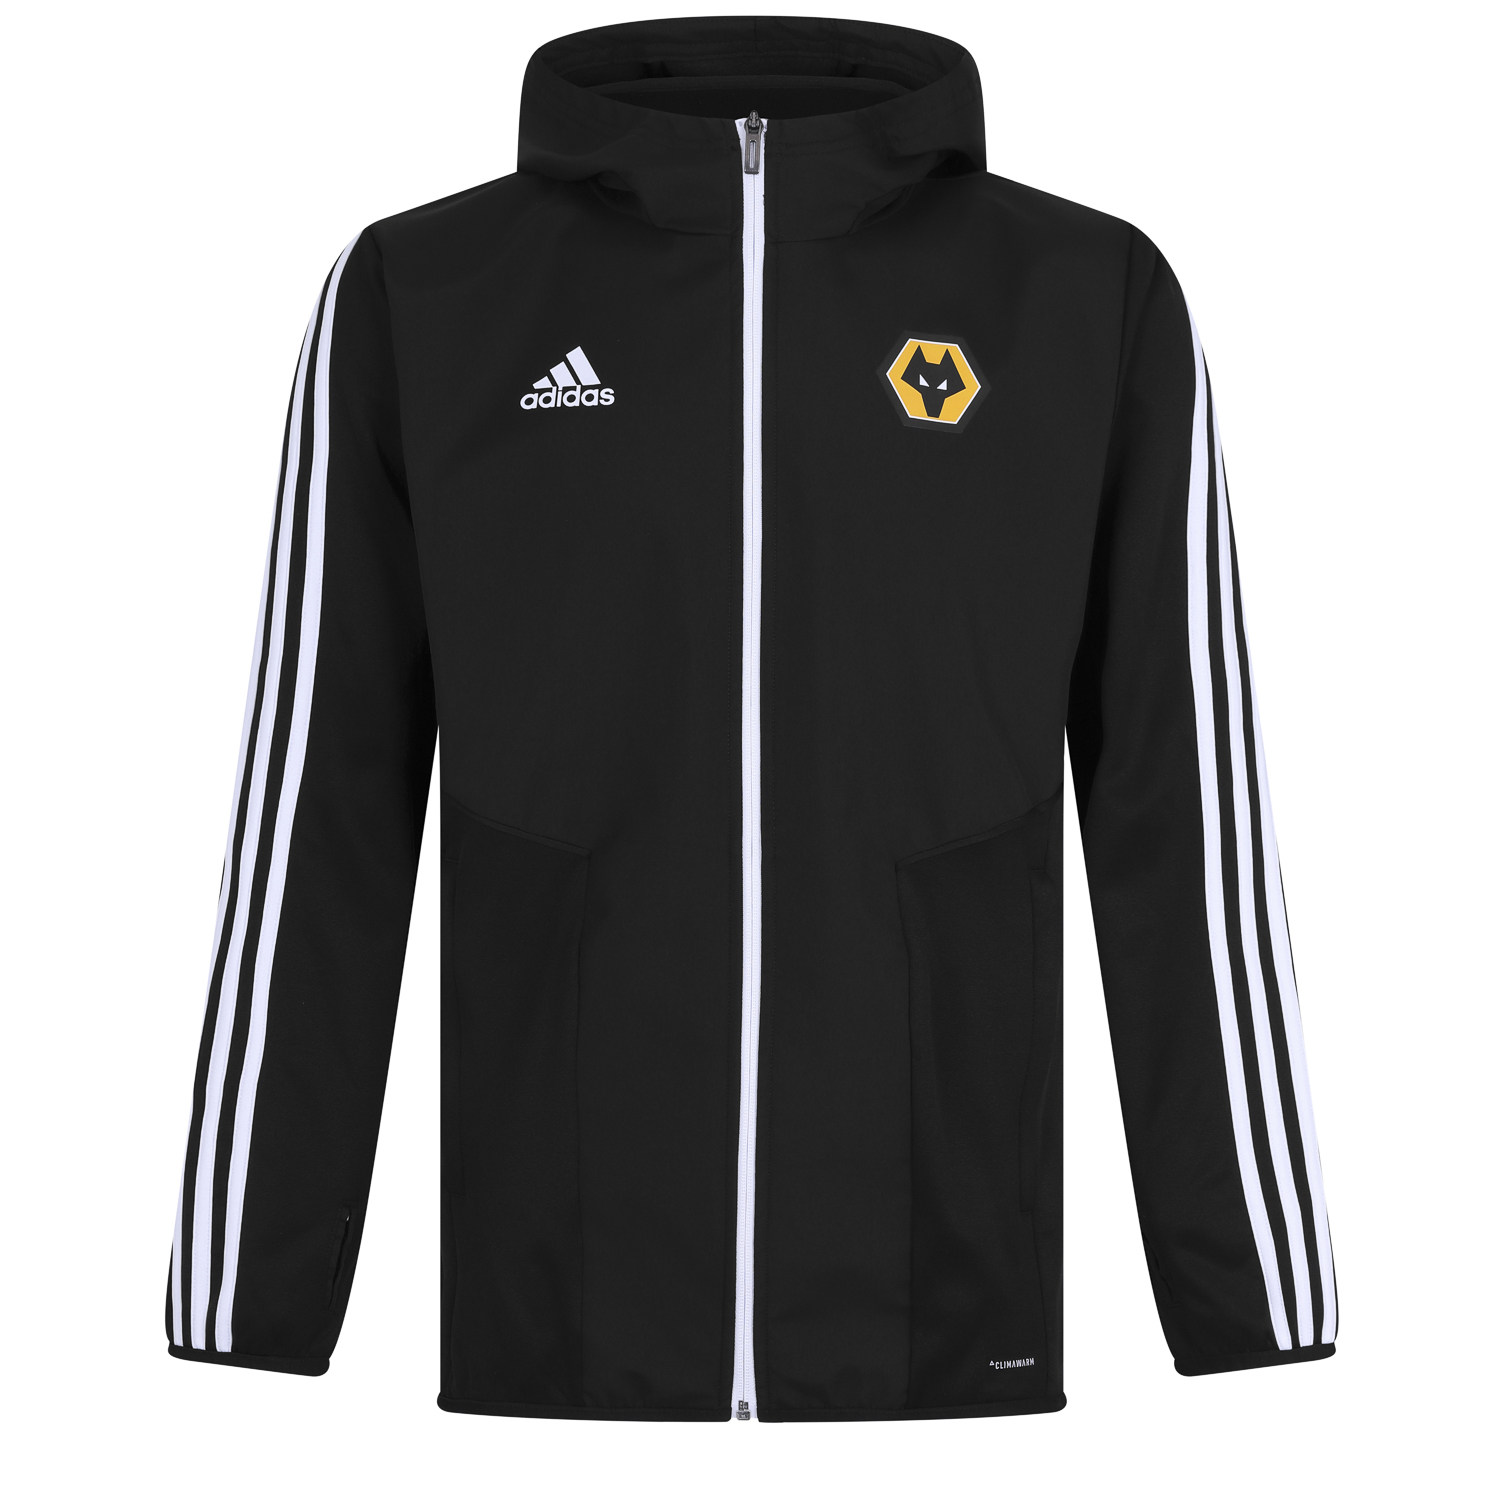 Wolves FC 2019-20 Matchday Warm Jacket - Black